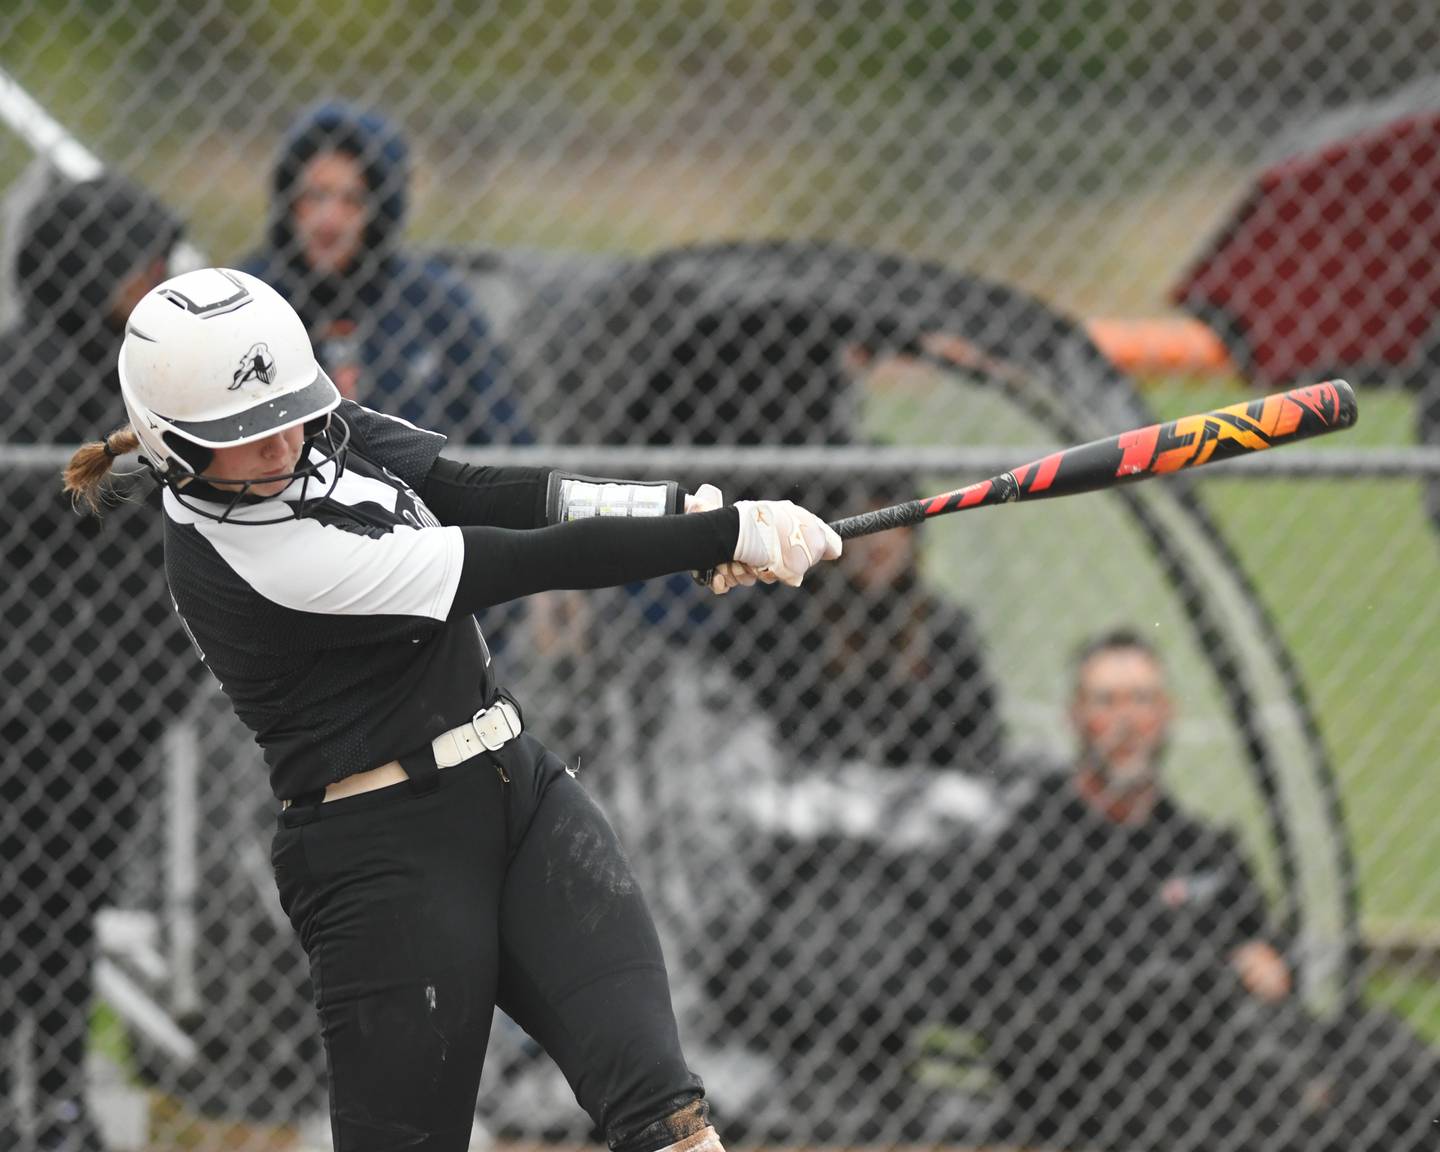 Kaneland Emily Olp (10) swings at a pitch on Saturday April 29th while traveling to take on DeKalb High School in DeKalb.